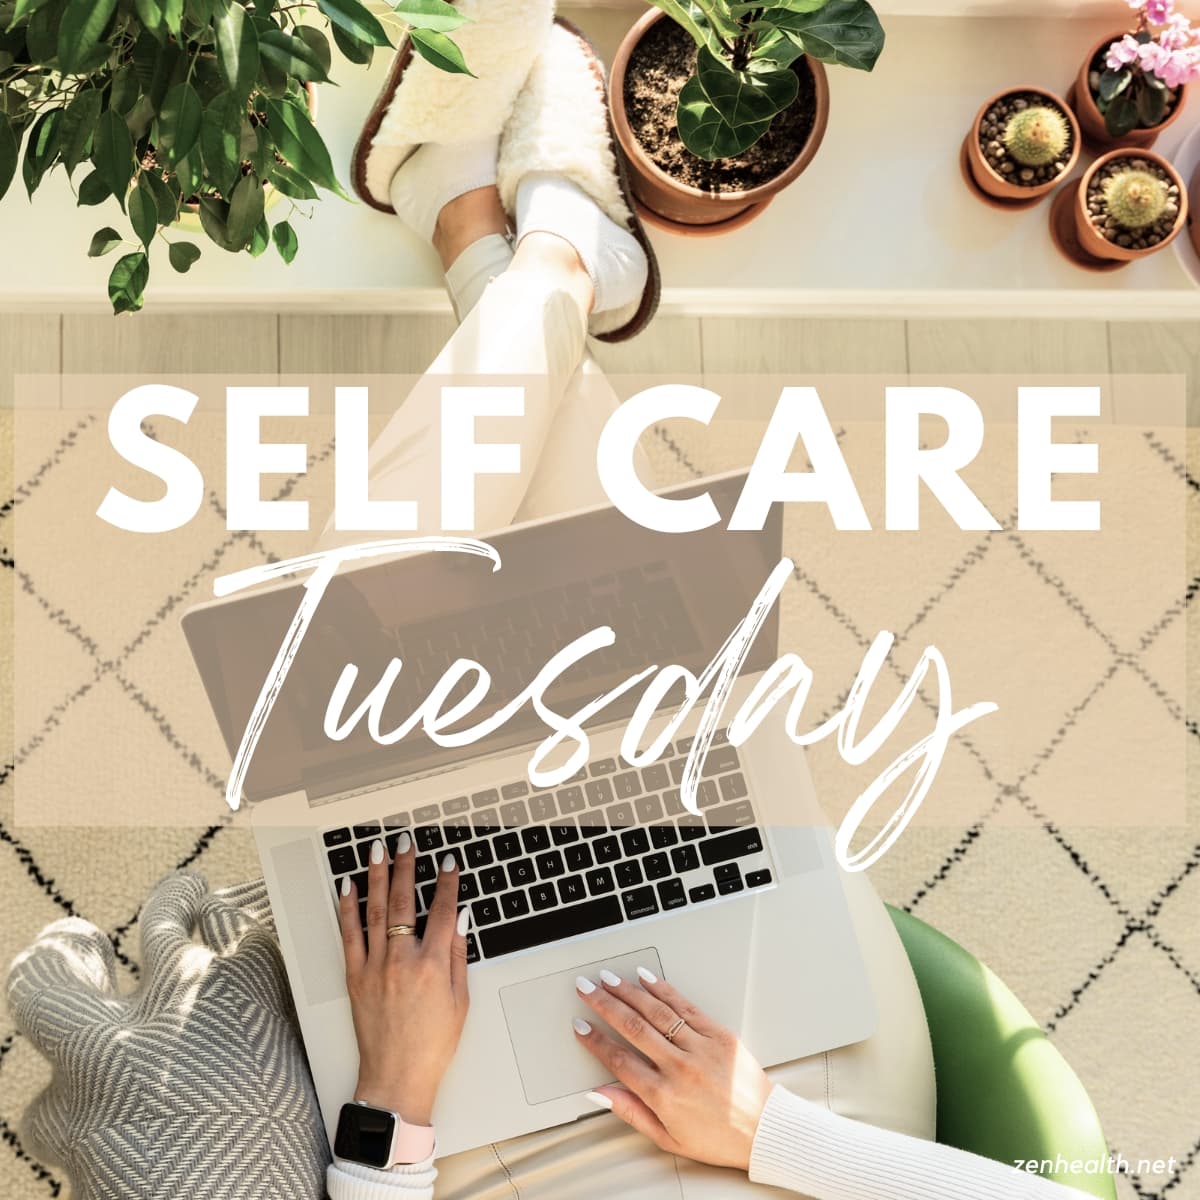 self care Tuesday text overlay on a photo of a woman sitting with her laptop and fuzzy slippers close to her plants